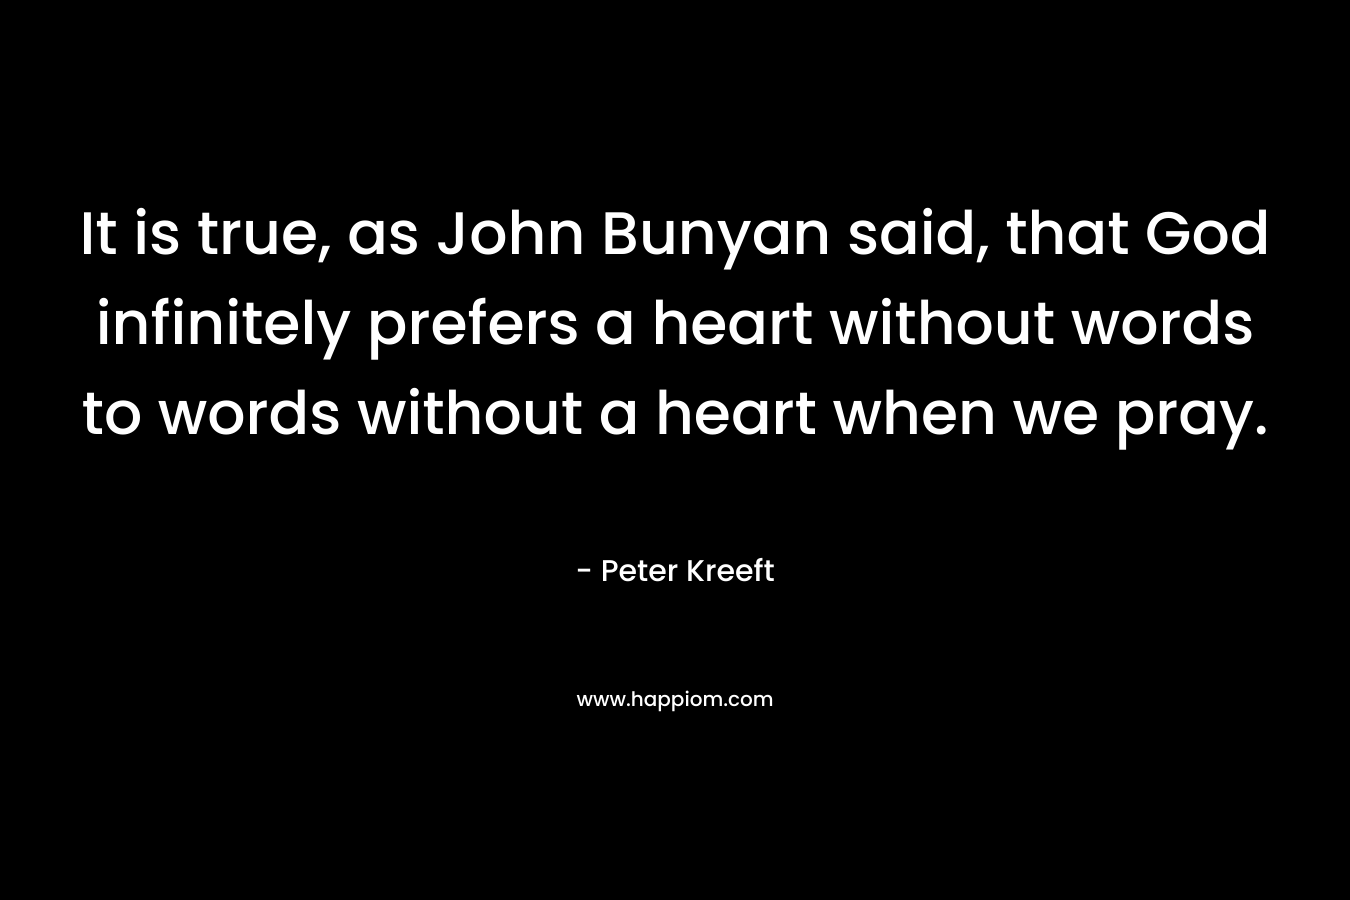 It is true, as John Bunyan said, that God infinitely prefers a heart without words to words without a heart when we pray.